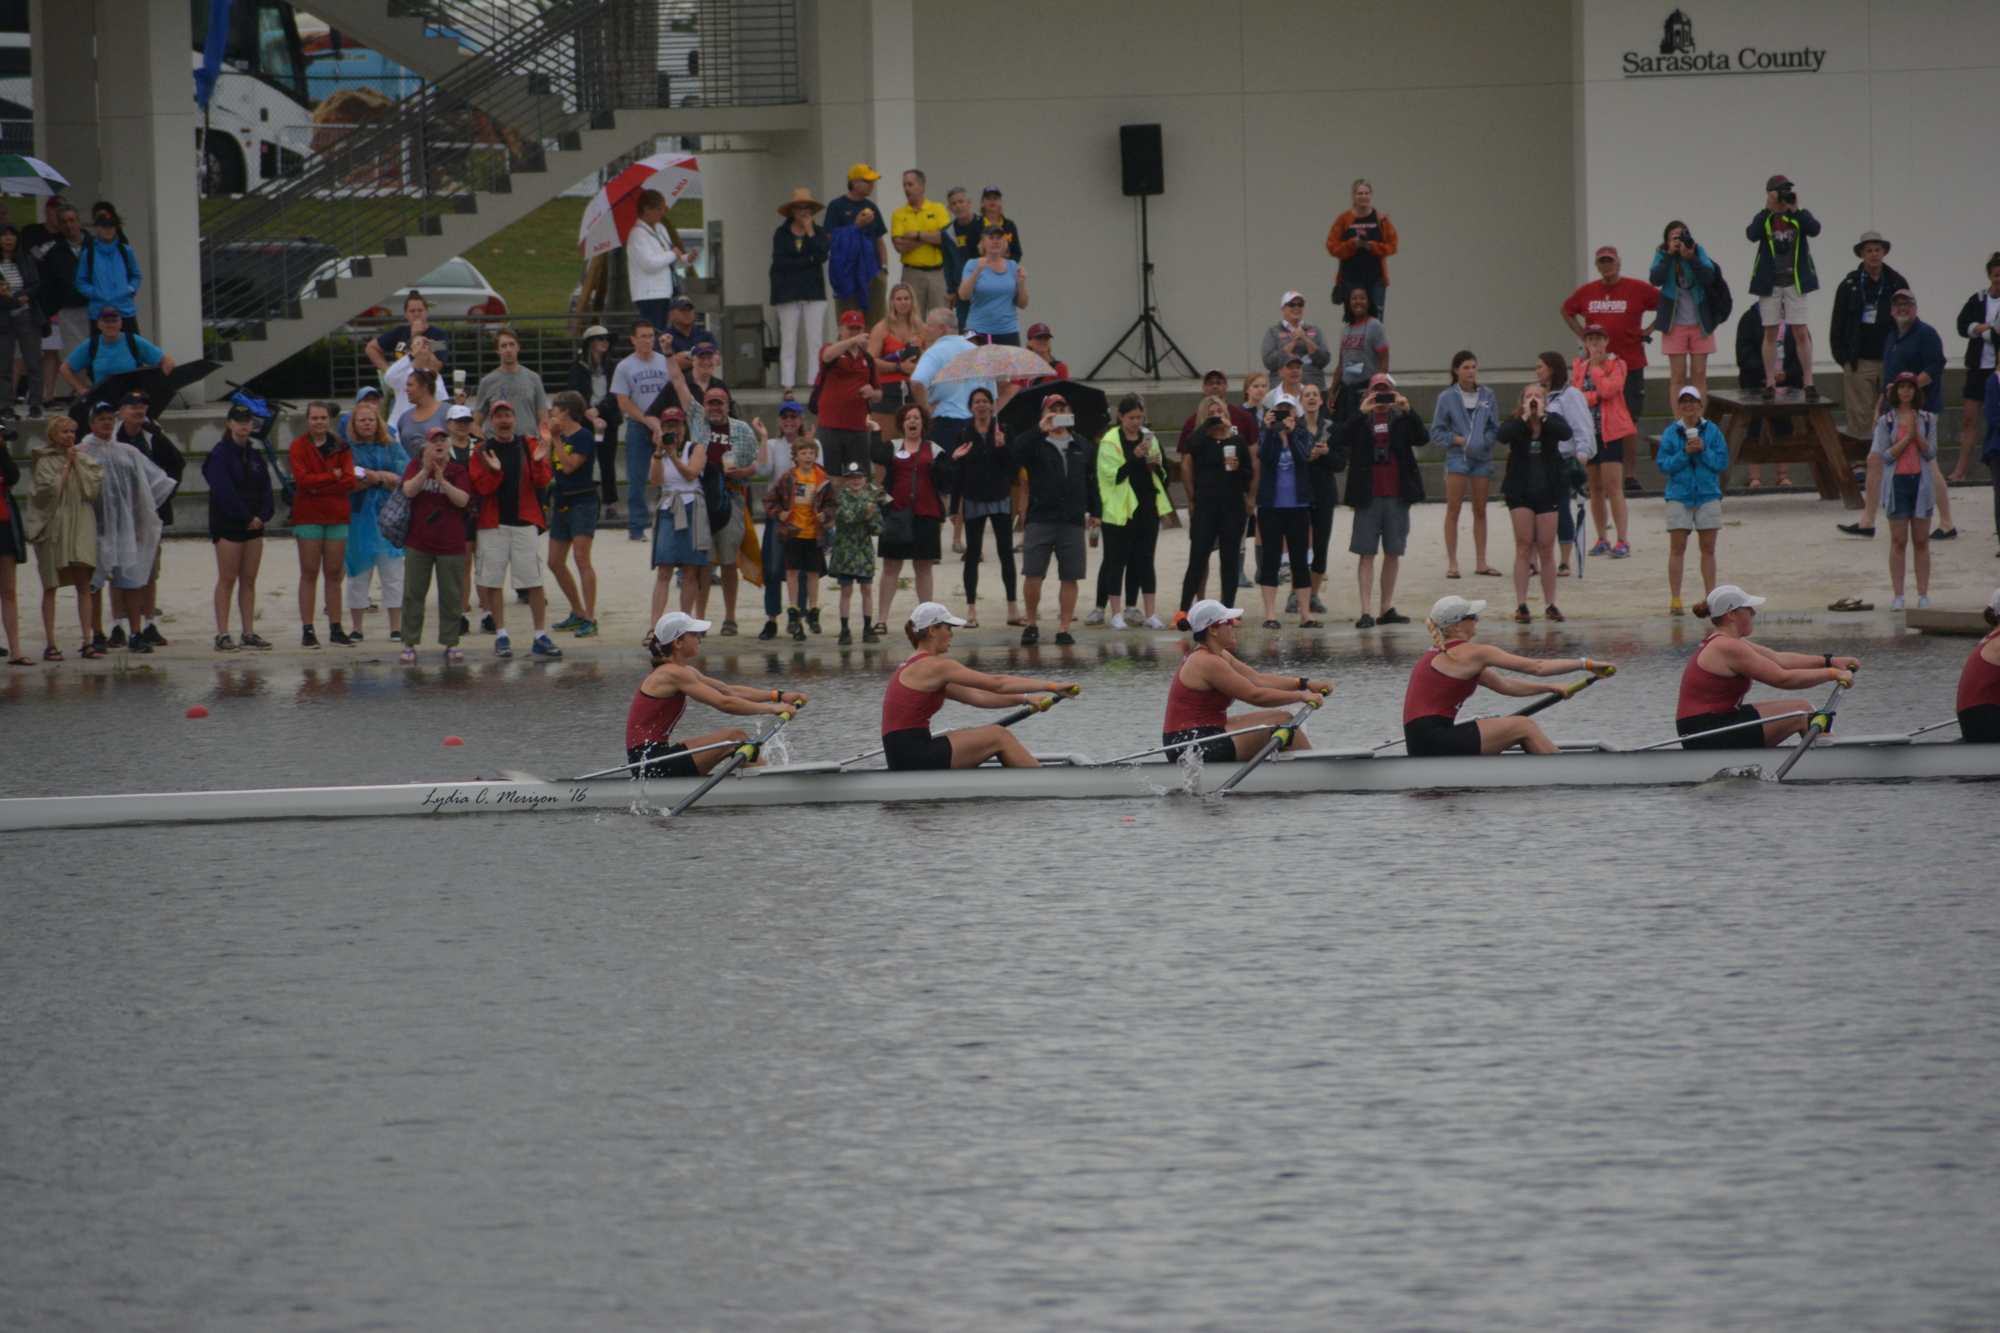 Bates College won the NCAA Women's Rowing Varsity 8 Division III national championship May 26 in another high profile event at Nathan Benderson Park.